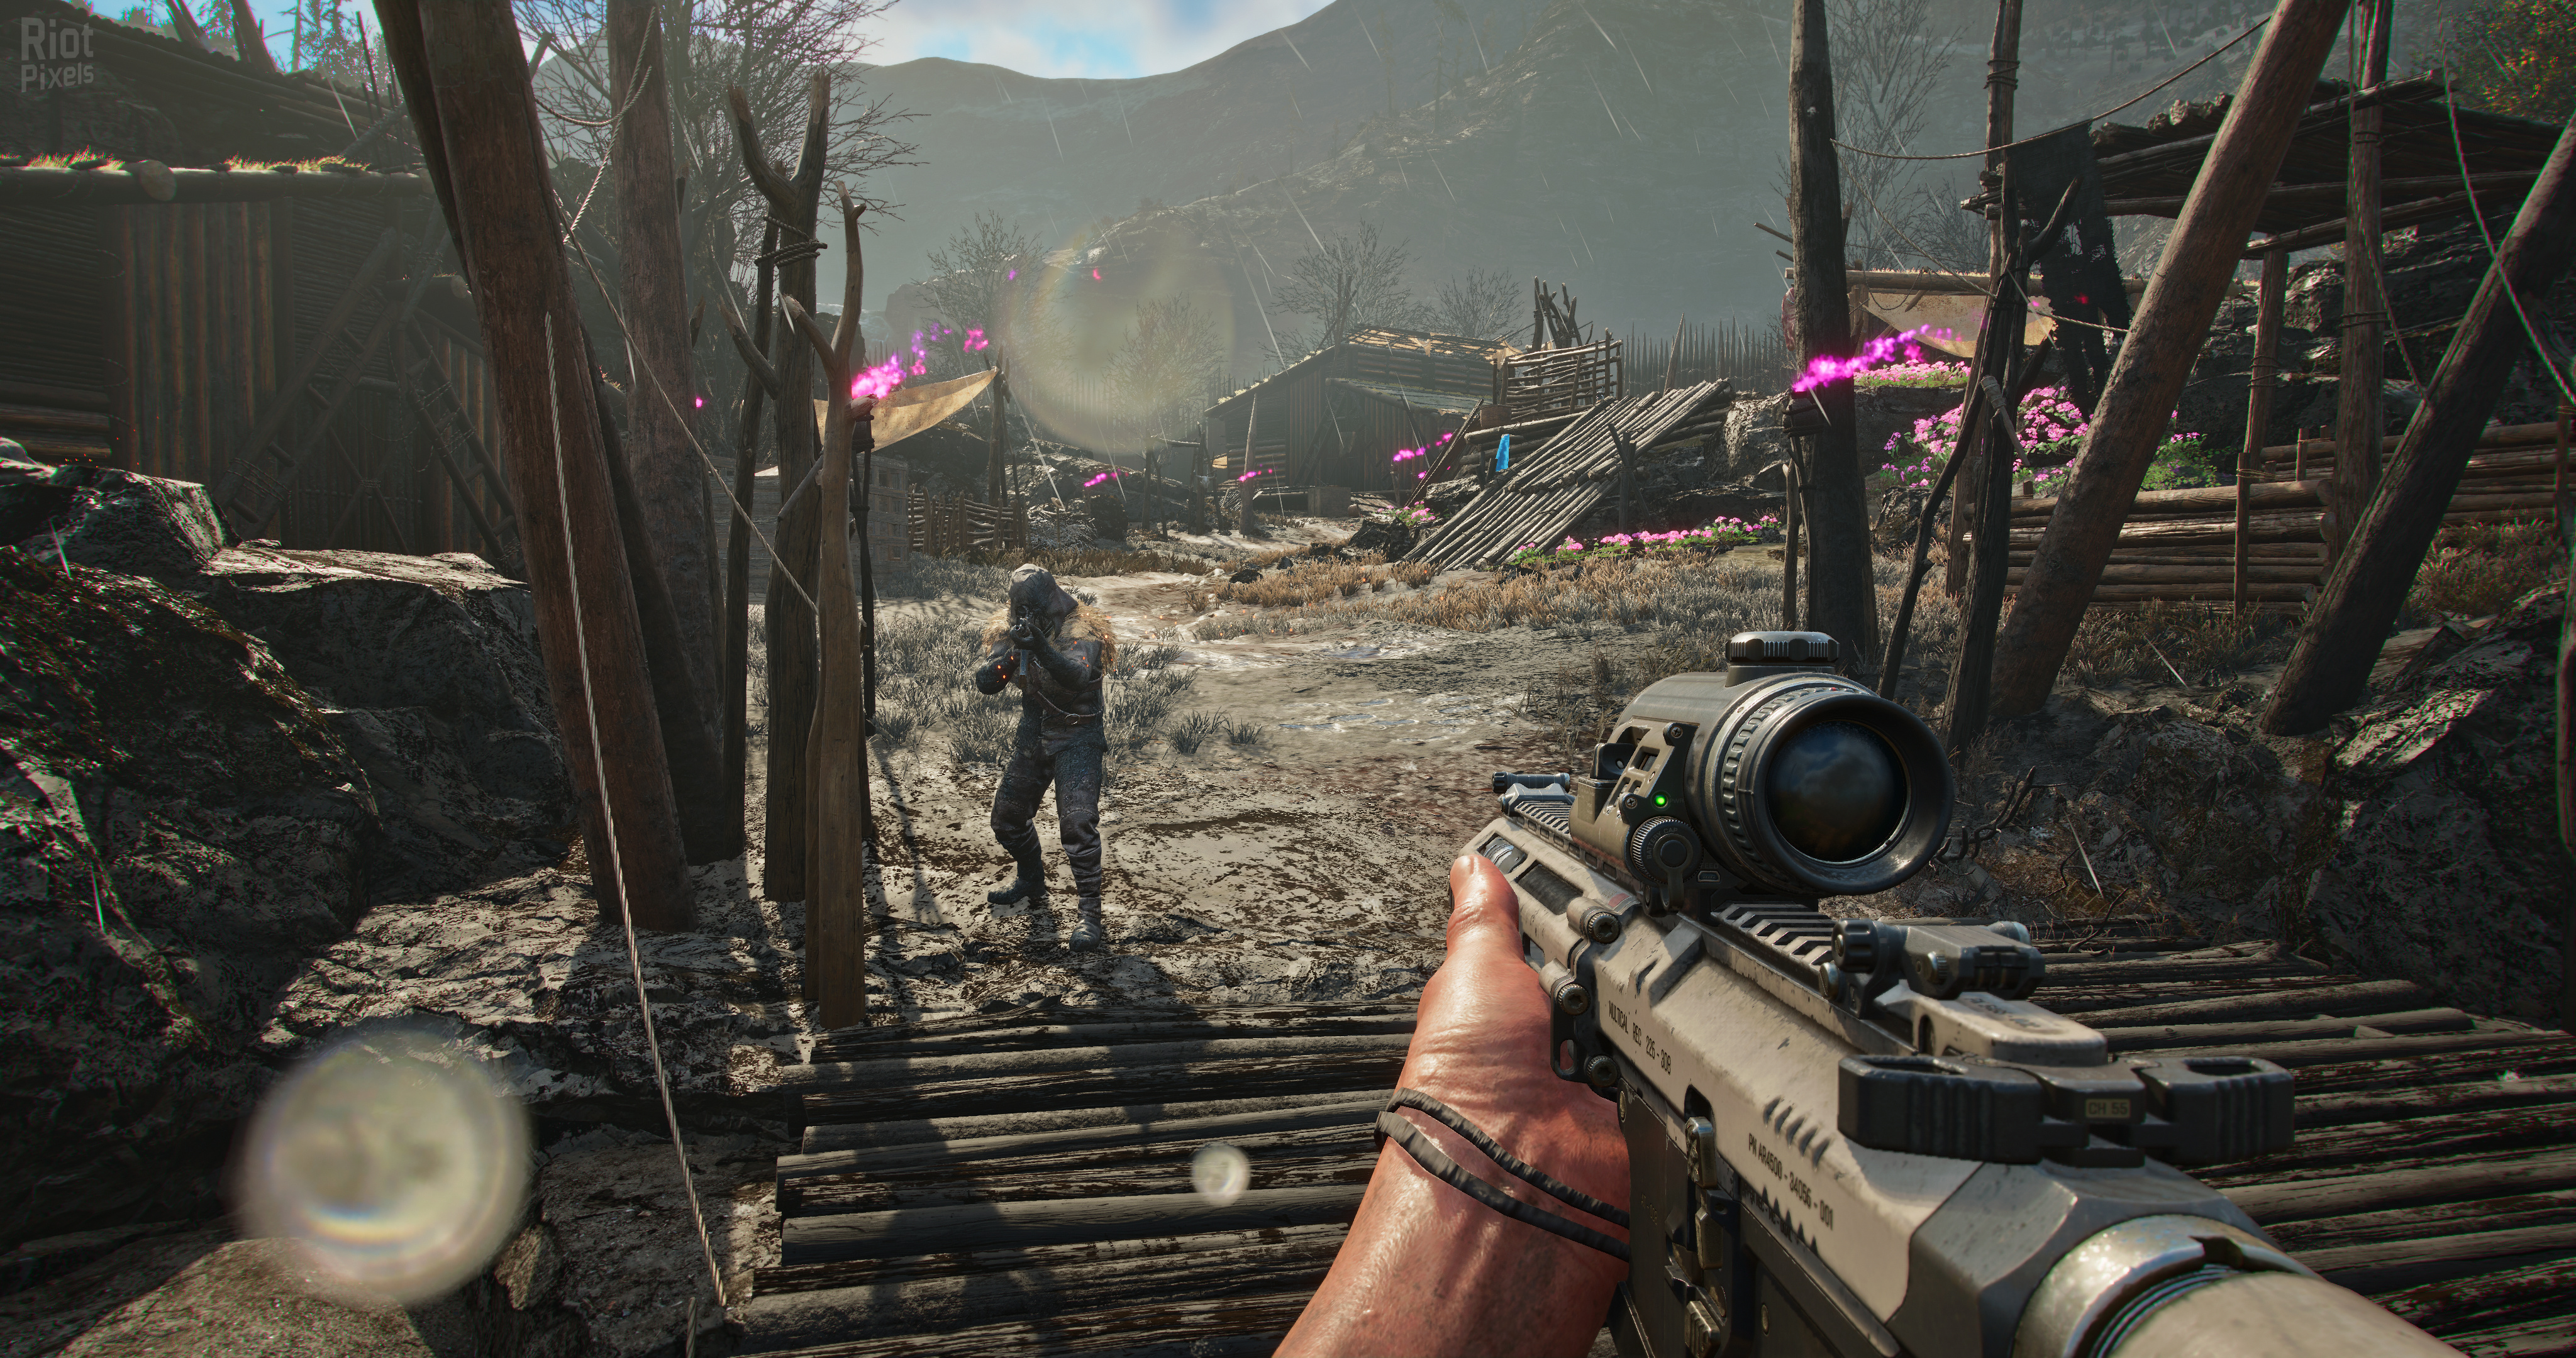 Far Cry 6 Update 1.000.013 Rolled Out This Feb. 14 - MP1st